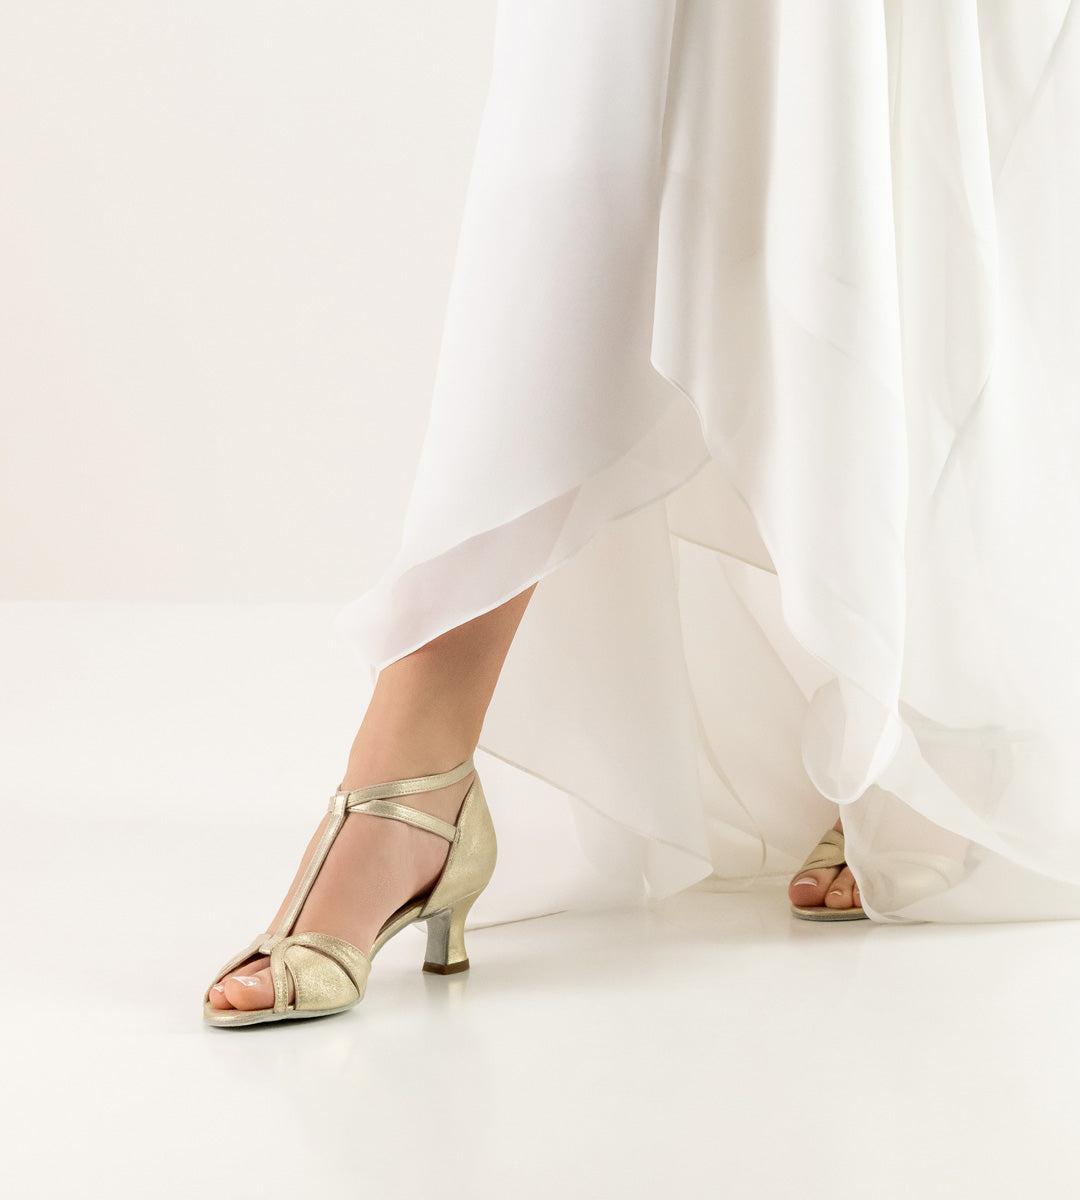 Werner Kern Astrid Open Toe Shimmering Suede Bridal and Latin Dance Shoe Available in Silver and Gold